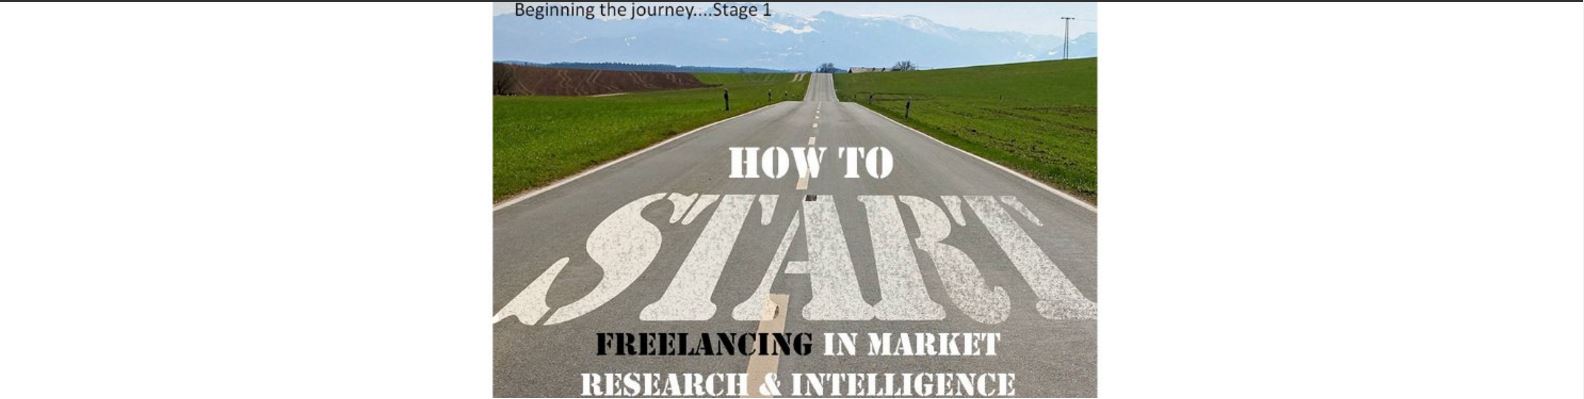 How to Start Freelancing as a Market Researcher featured image